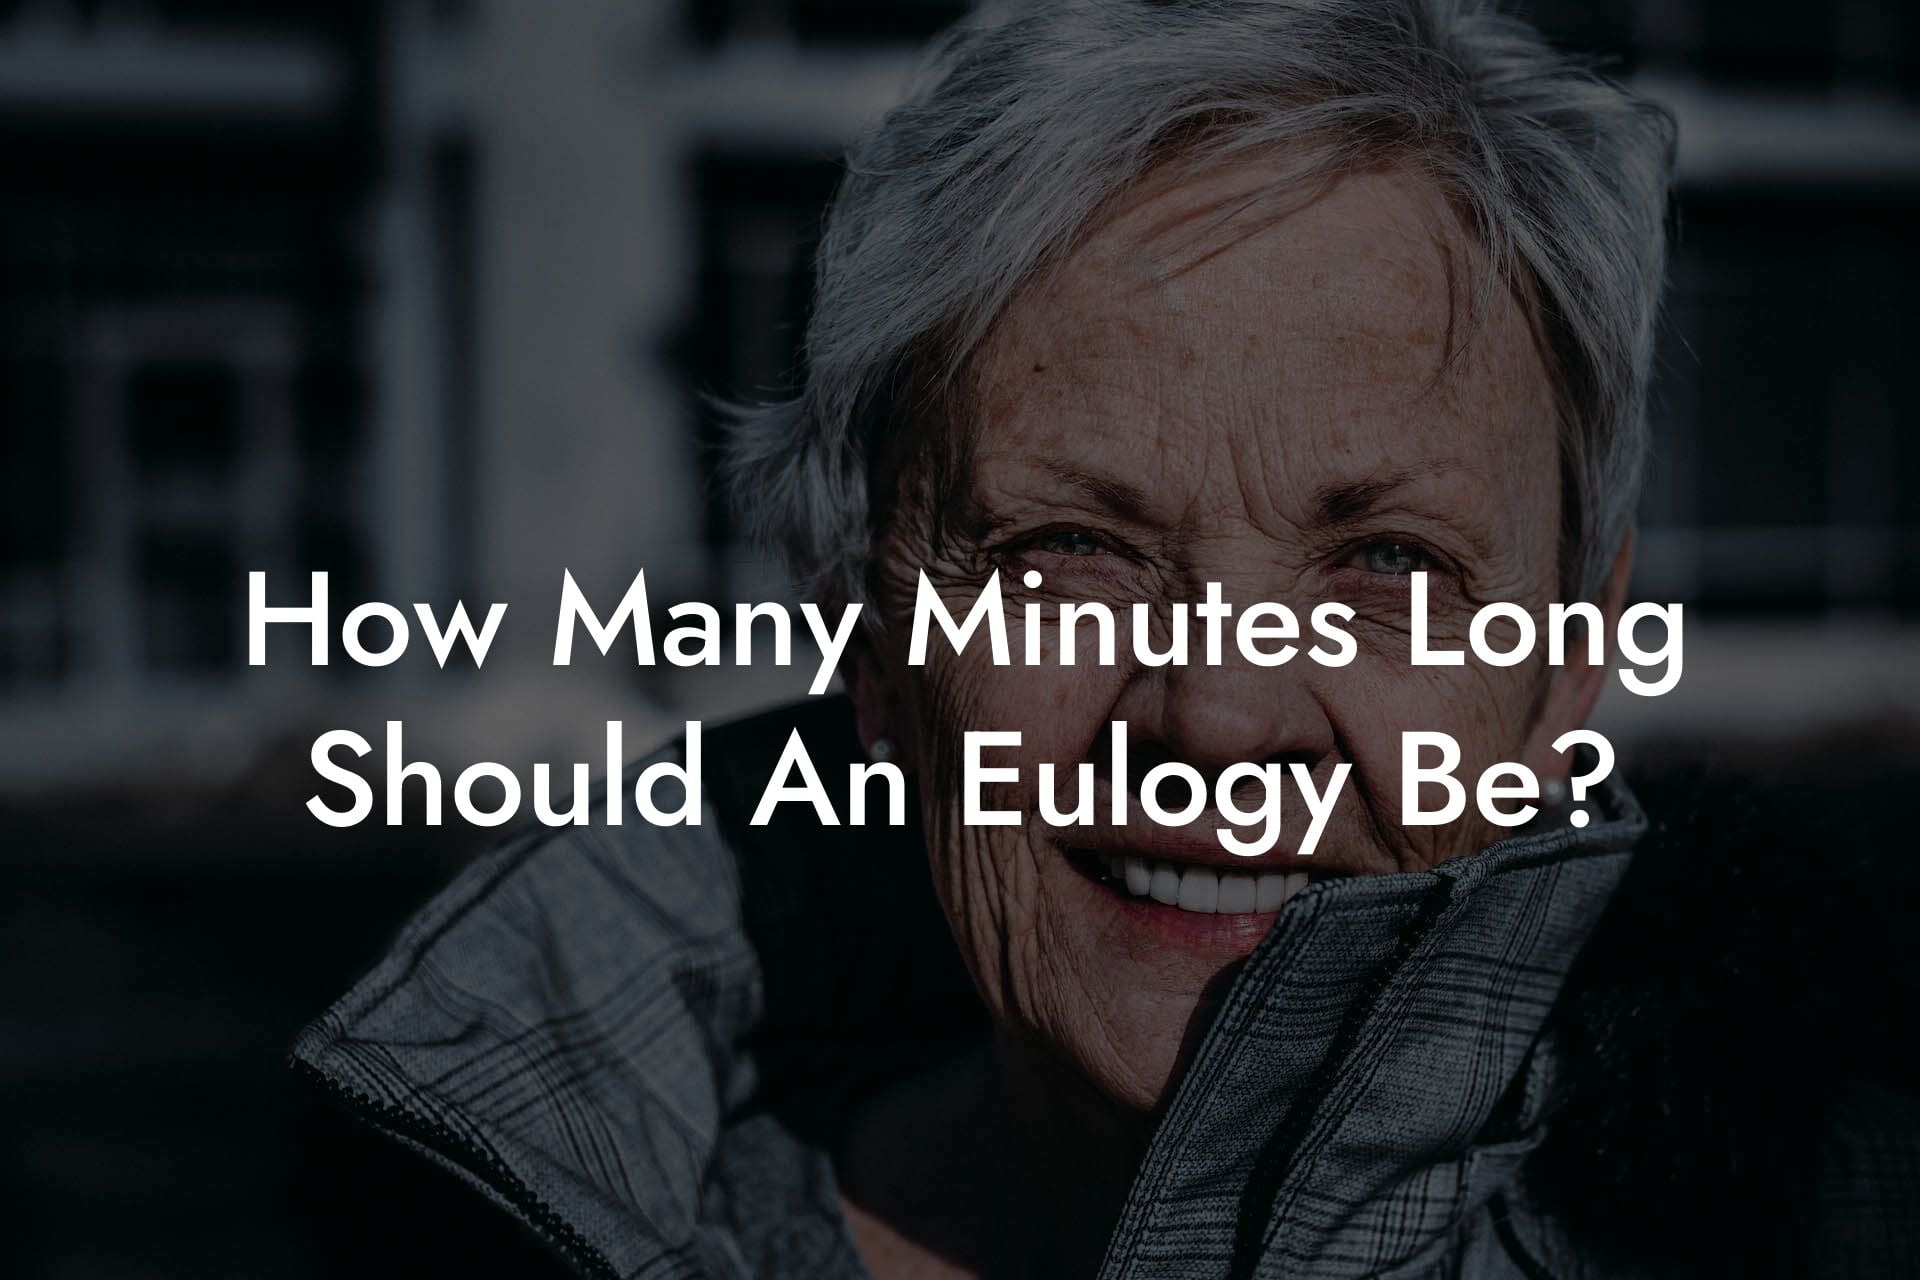 How Many Minutes Long Should An Eulogy Be?